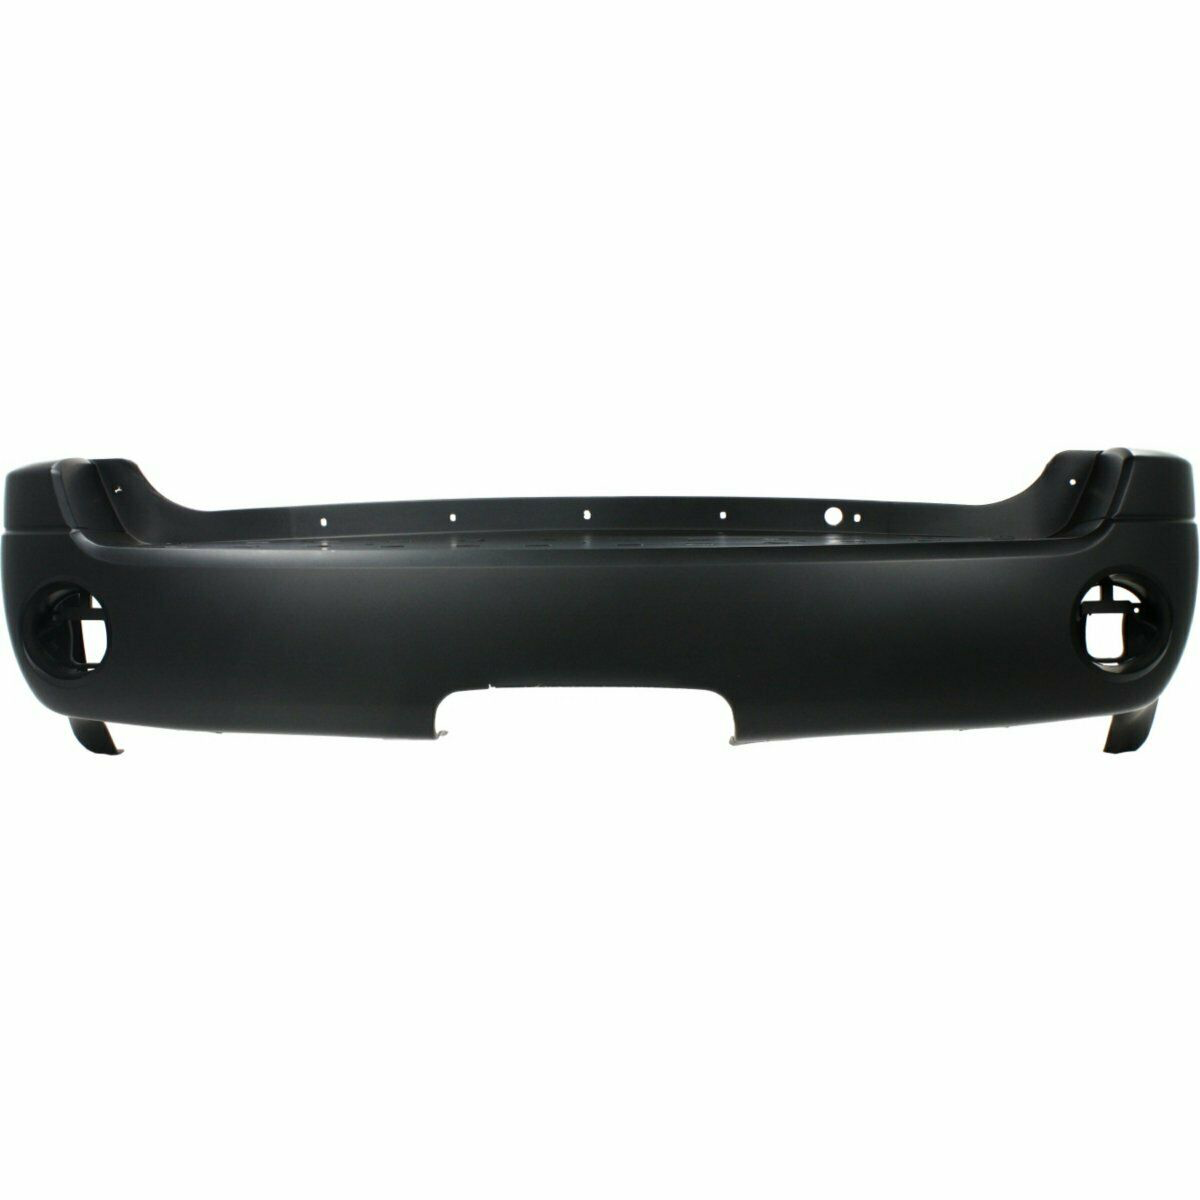 2002-2009 GMC Envoy Rear Bumper Painted to Match